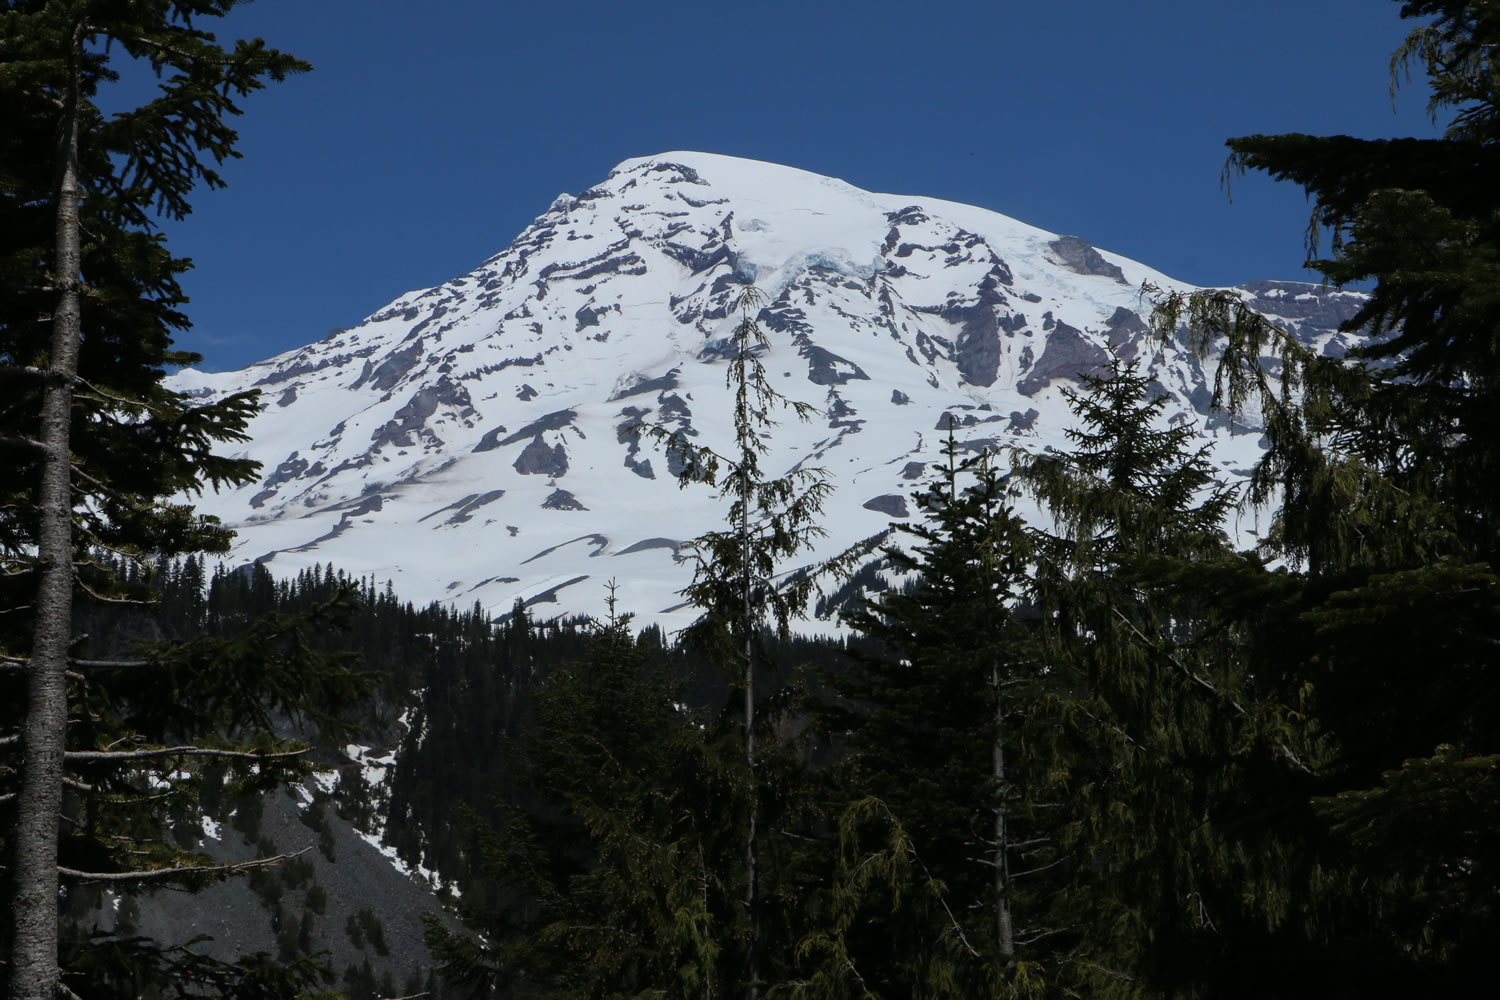 Mount Rainier is seen in the distance from a viewpoint within Mount Rainier National Park on Sunday.